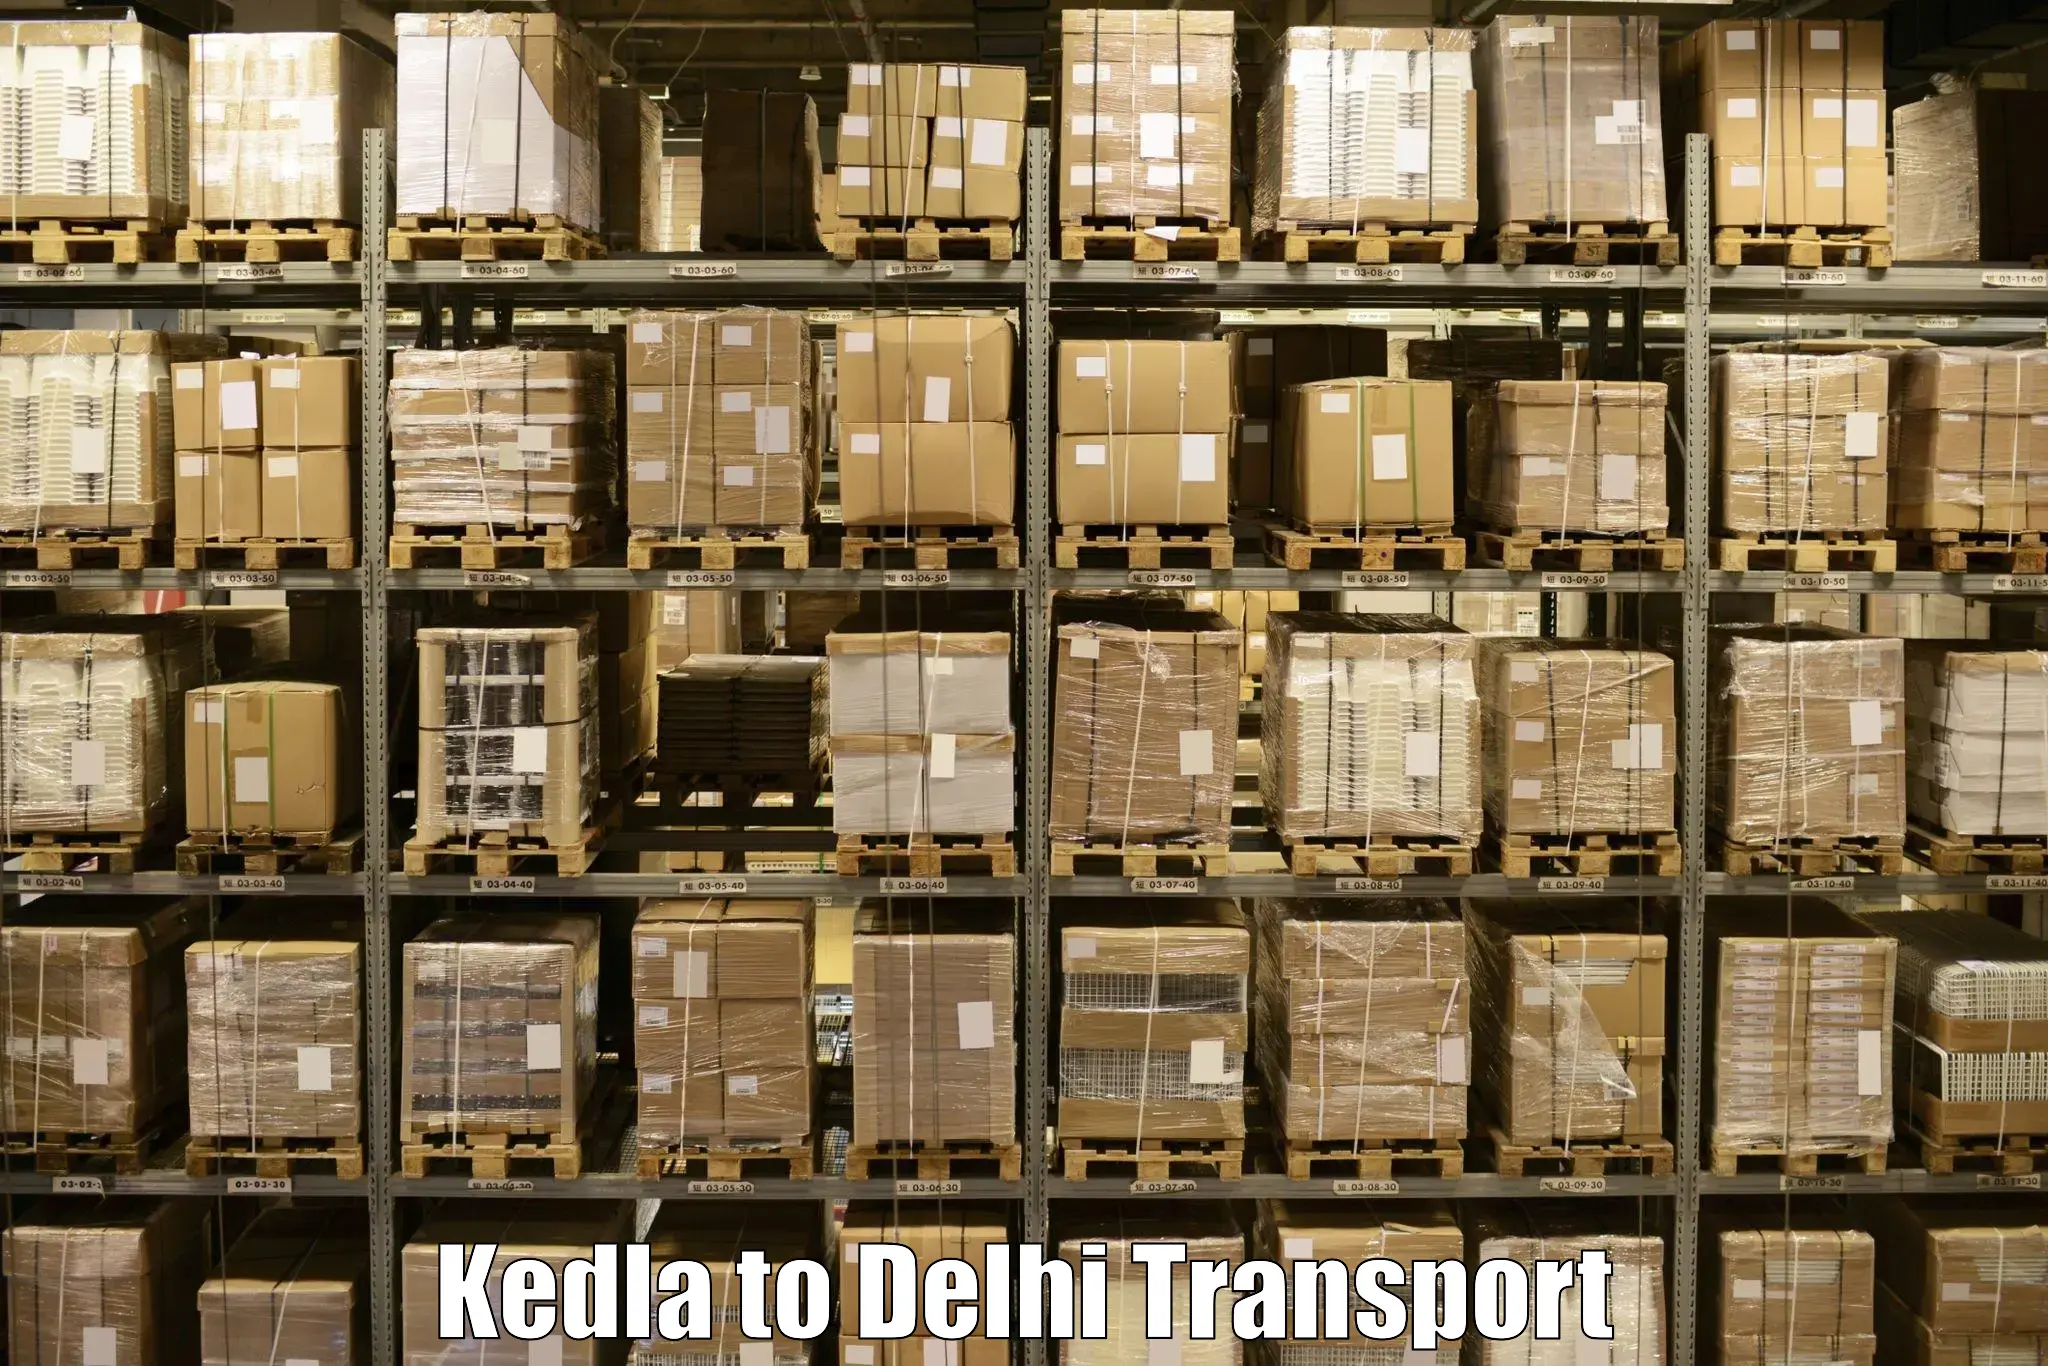 Transport bike from one state to another Kedla to IIT Delhi